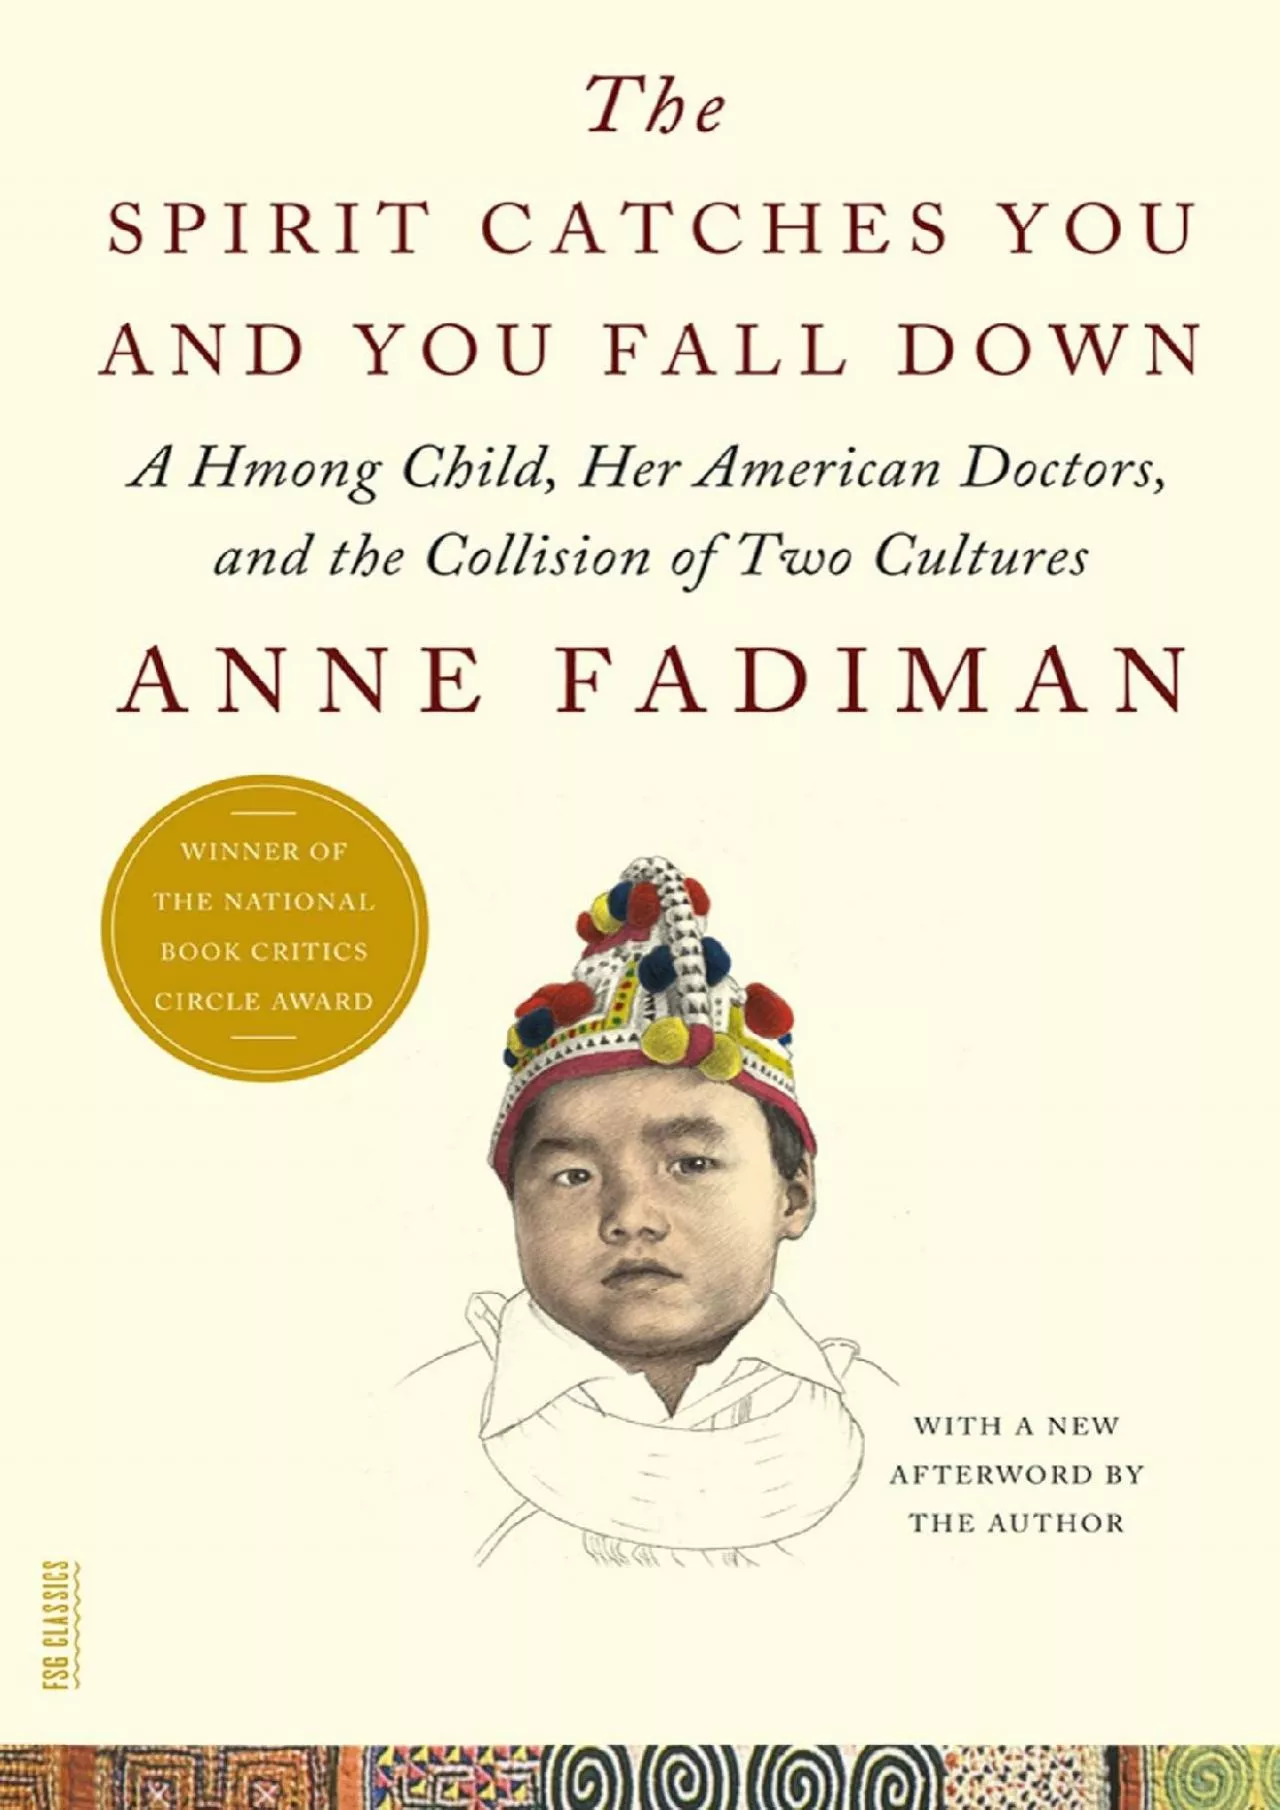 (EBOOK)-The Spirit Catches You and You Fall Down: A Hmong Child, Her American Doctors,